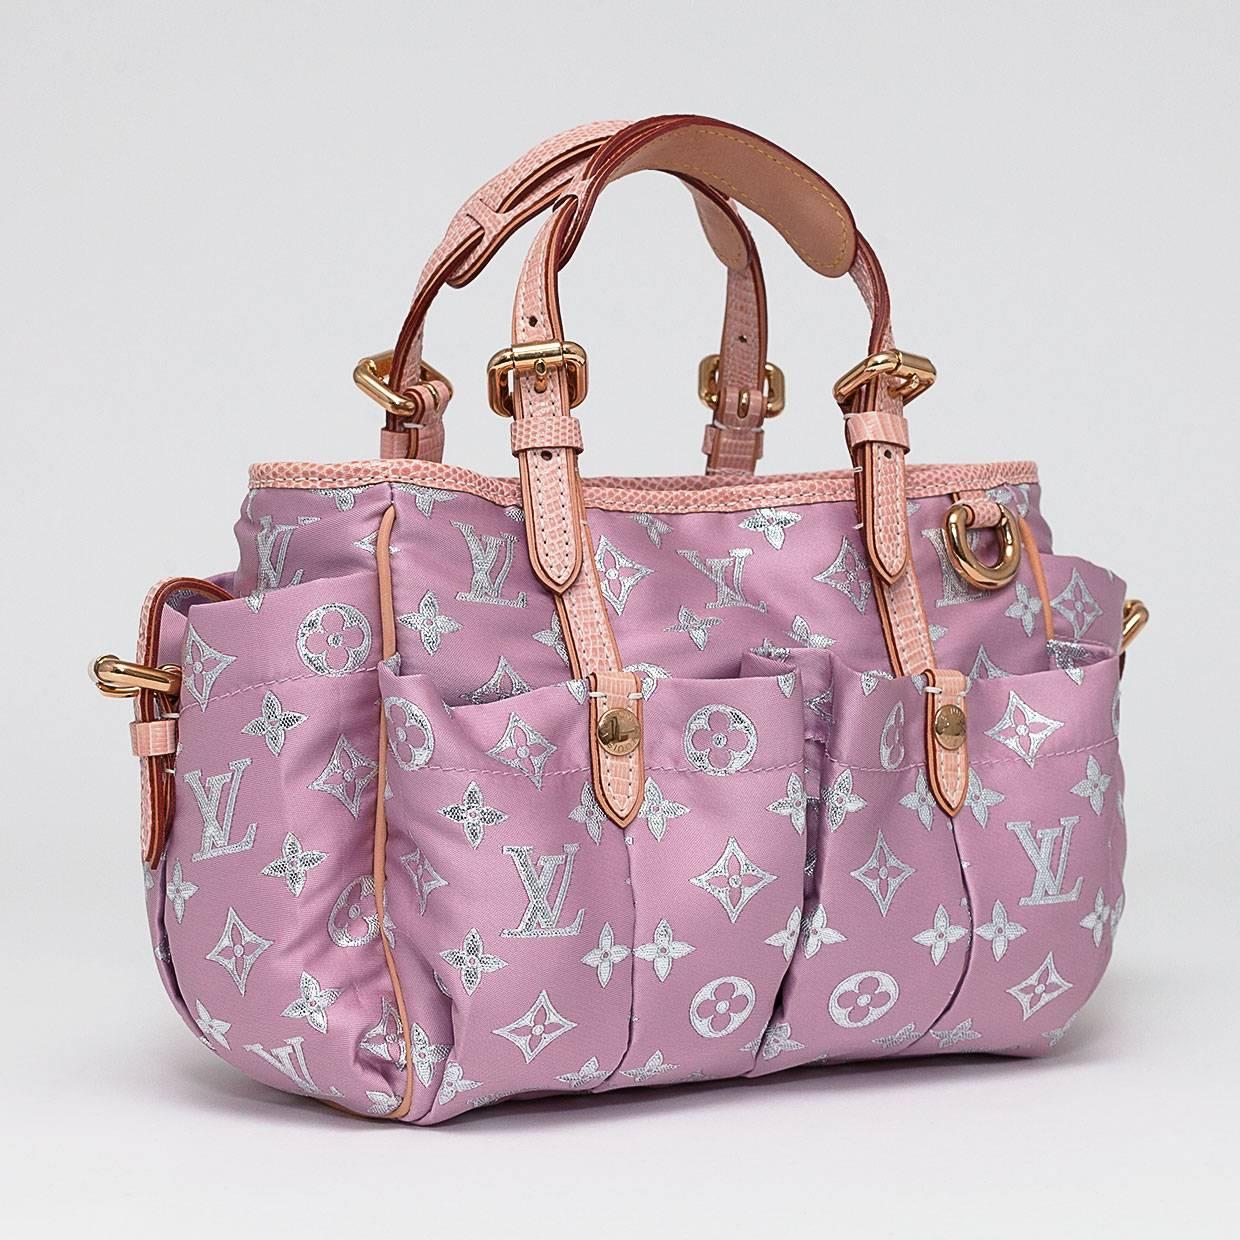 louis vuitton limited edition pink bag